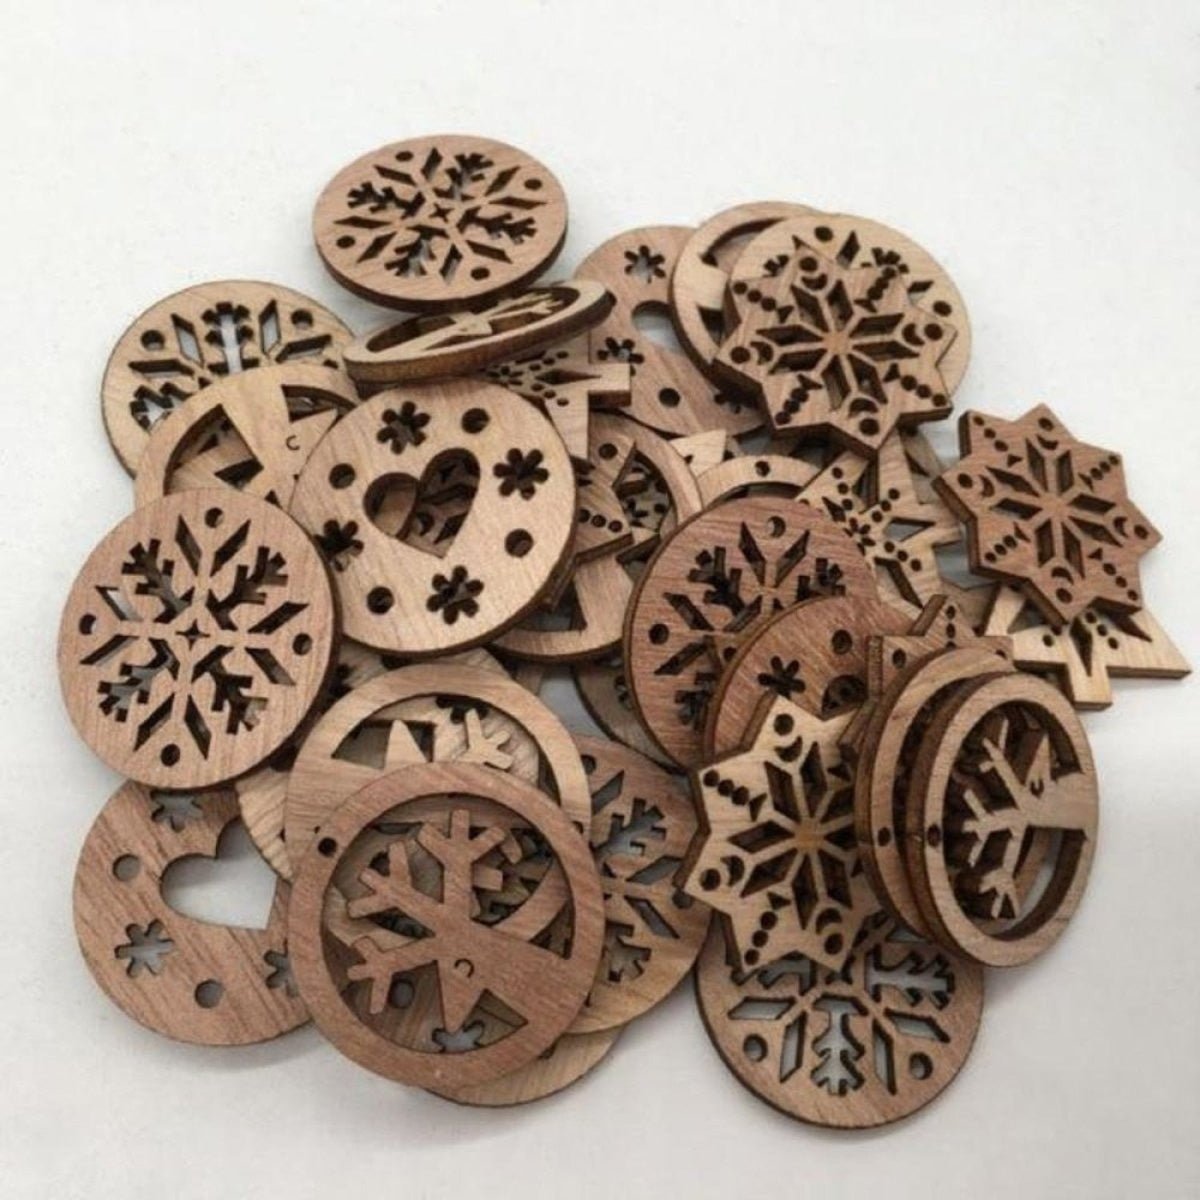 50pcs Mixed Darker 30mm Natural Wood Craft Christmas Pendant Hanging Ornament New Year Decor Home Decorations - - Asia Sell